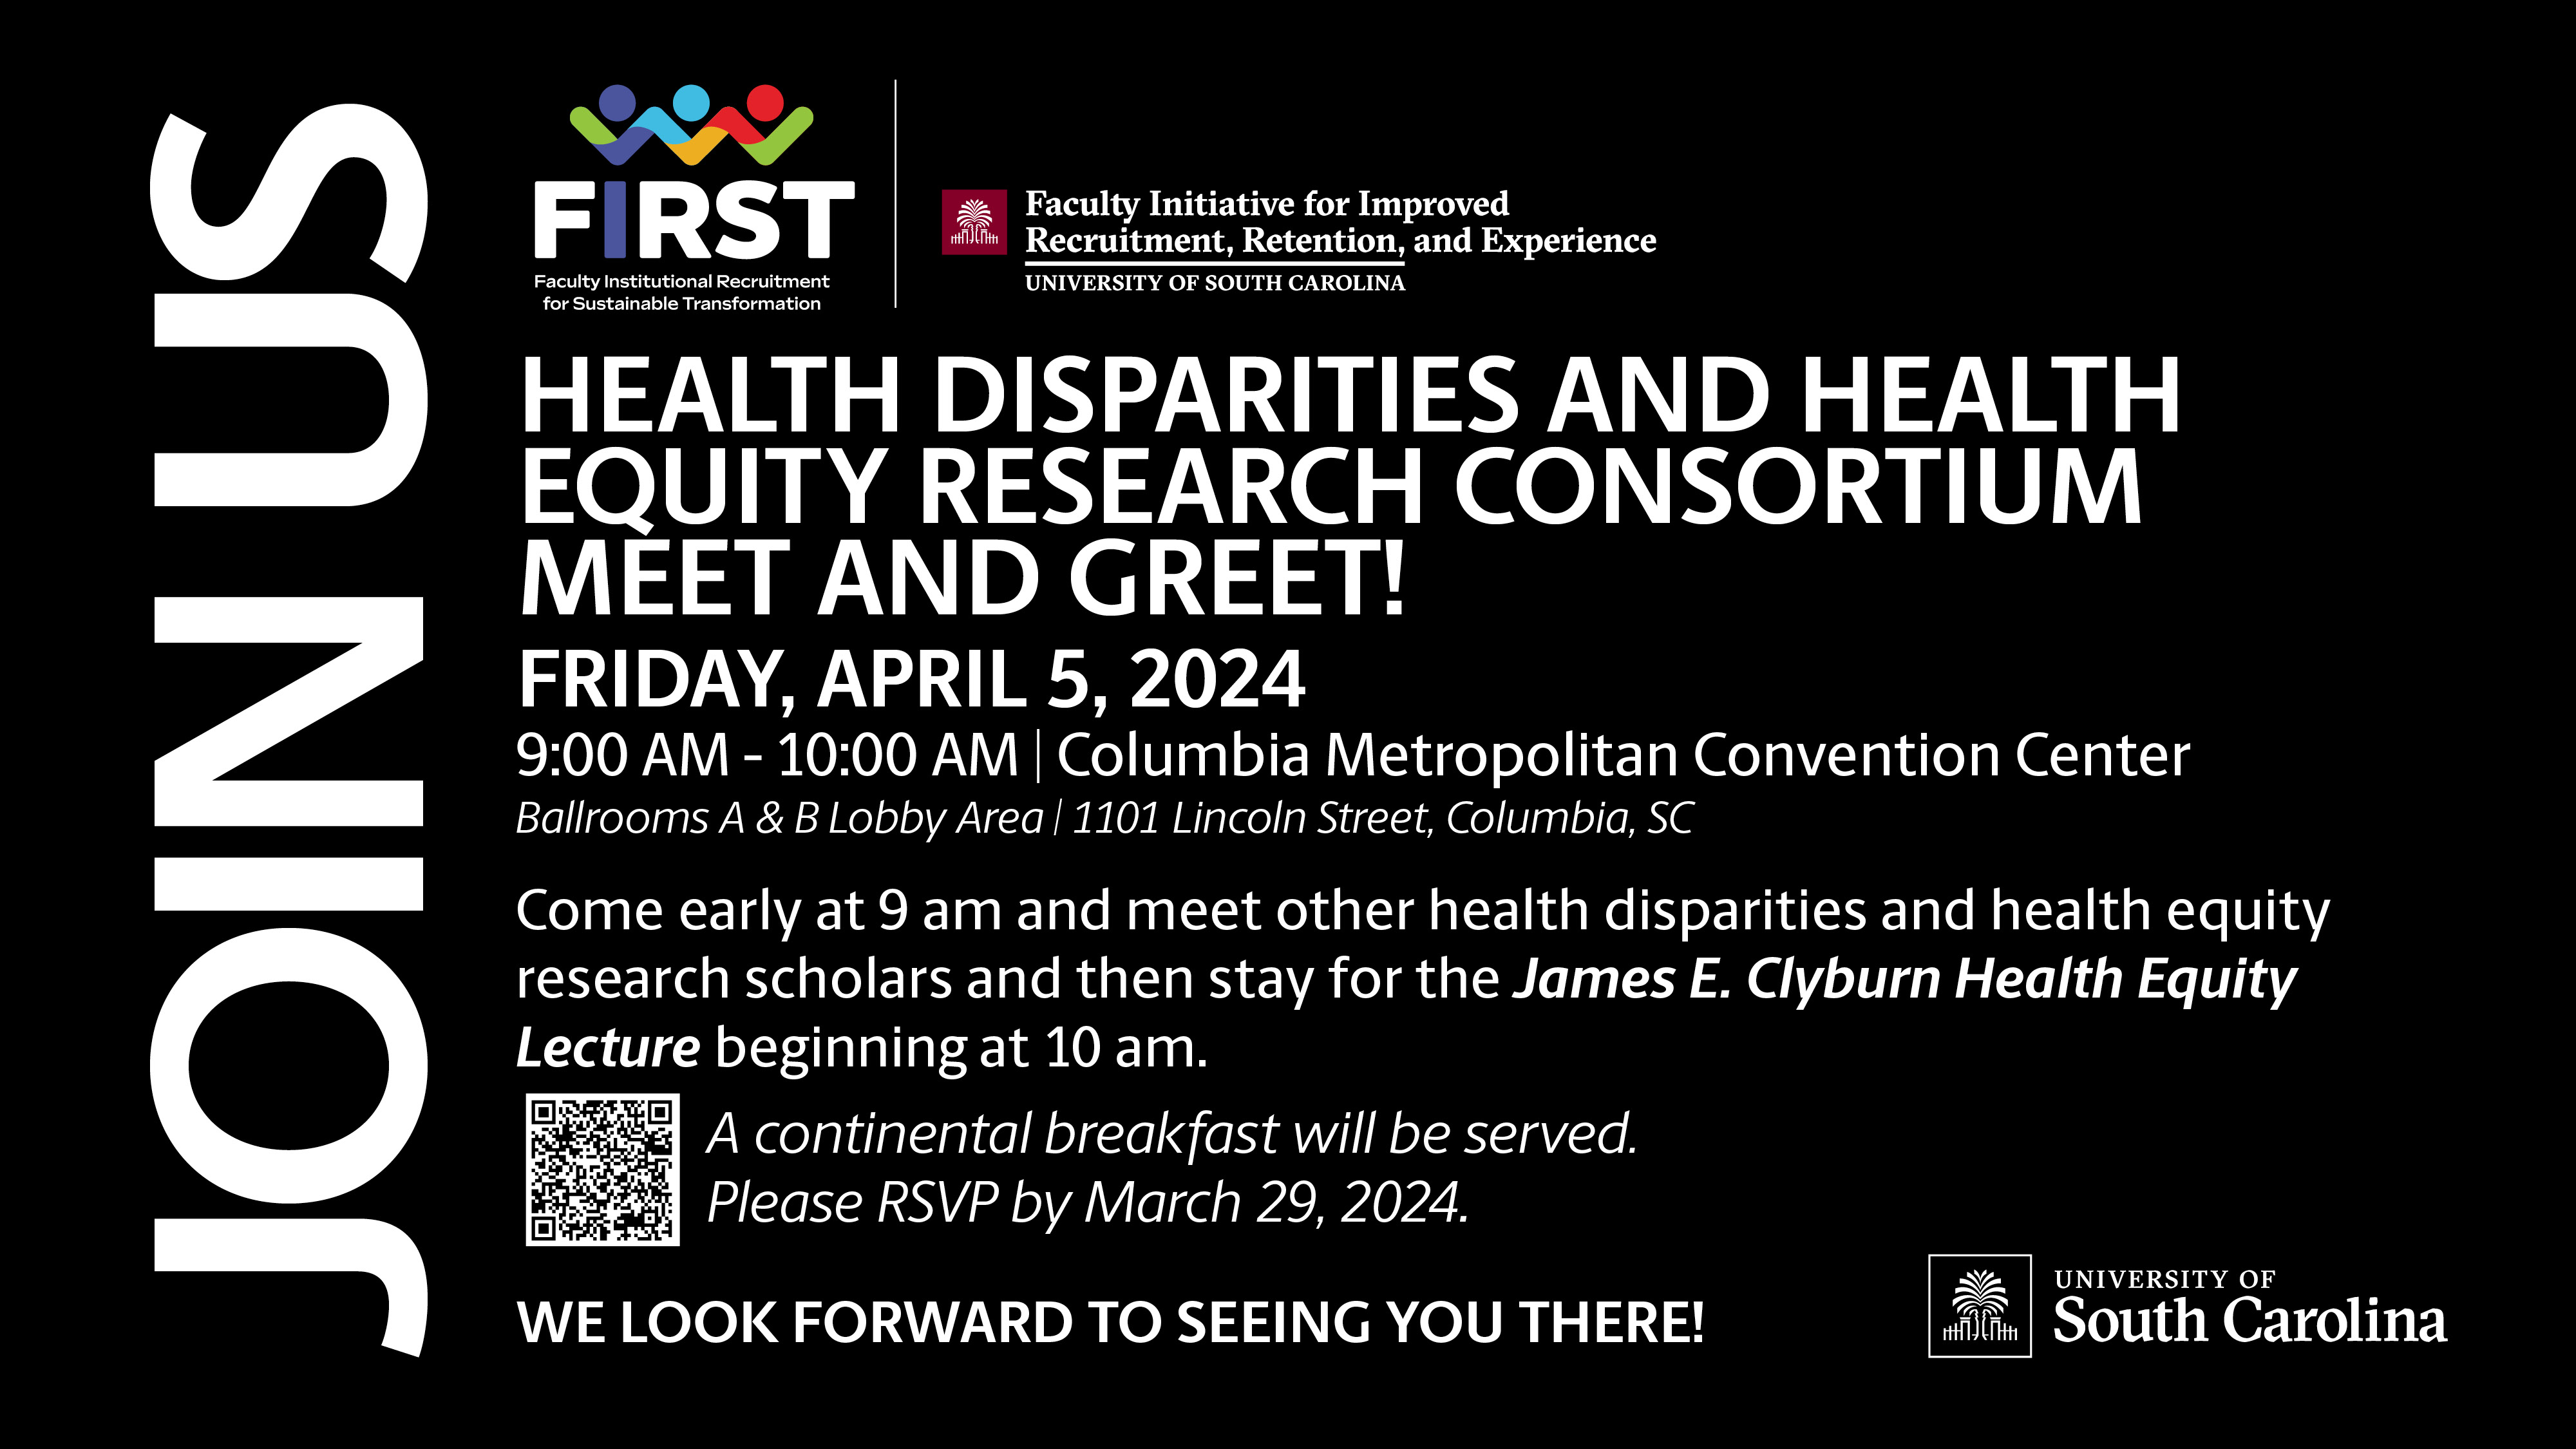 USC First Fiirre | Health Disparities and Health Equity Research Consortium